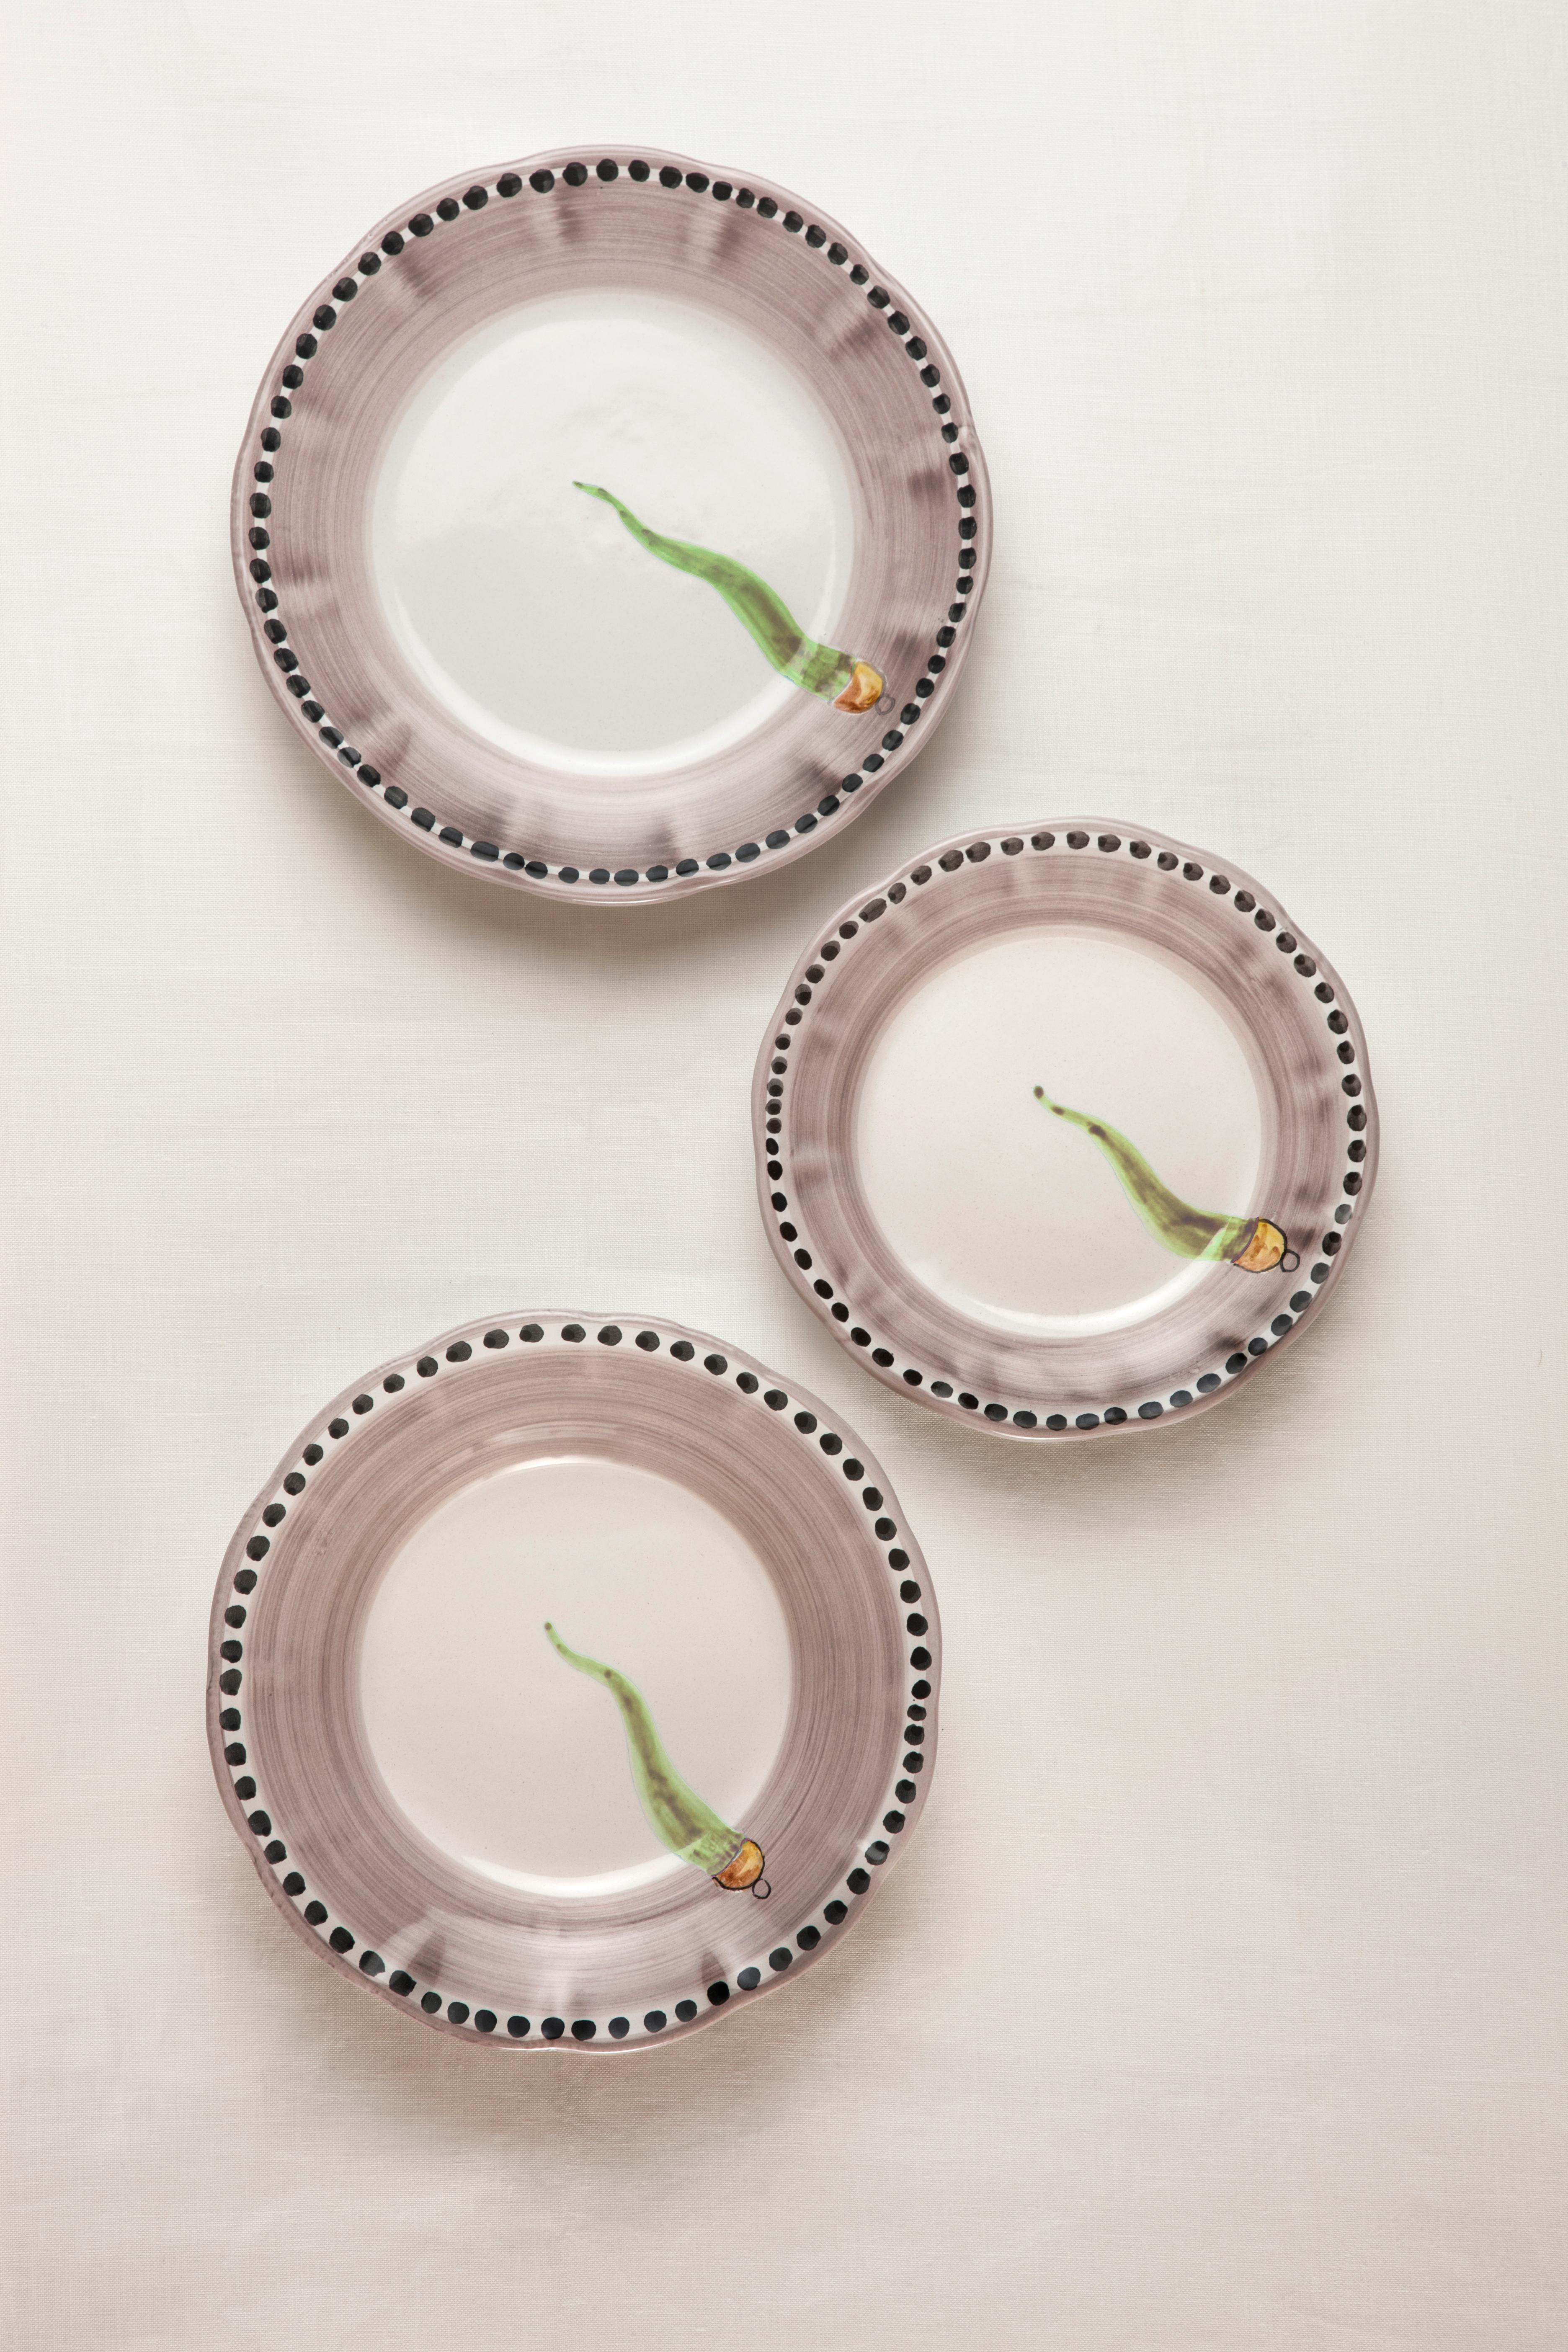 Contemporary 21st Century Hand Painted Ceramic Dinner Plates in Green and White Made in Italy For Sale